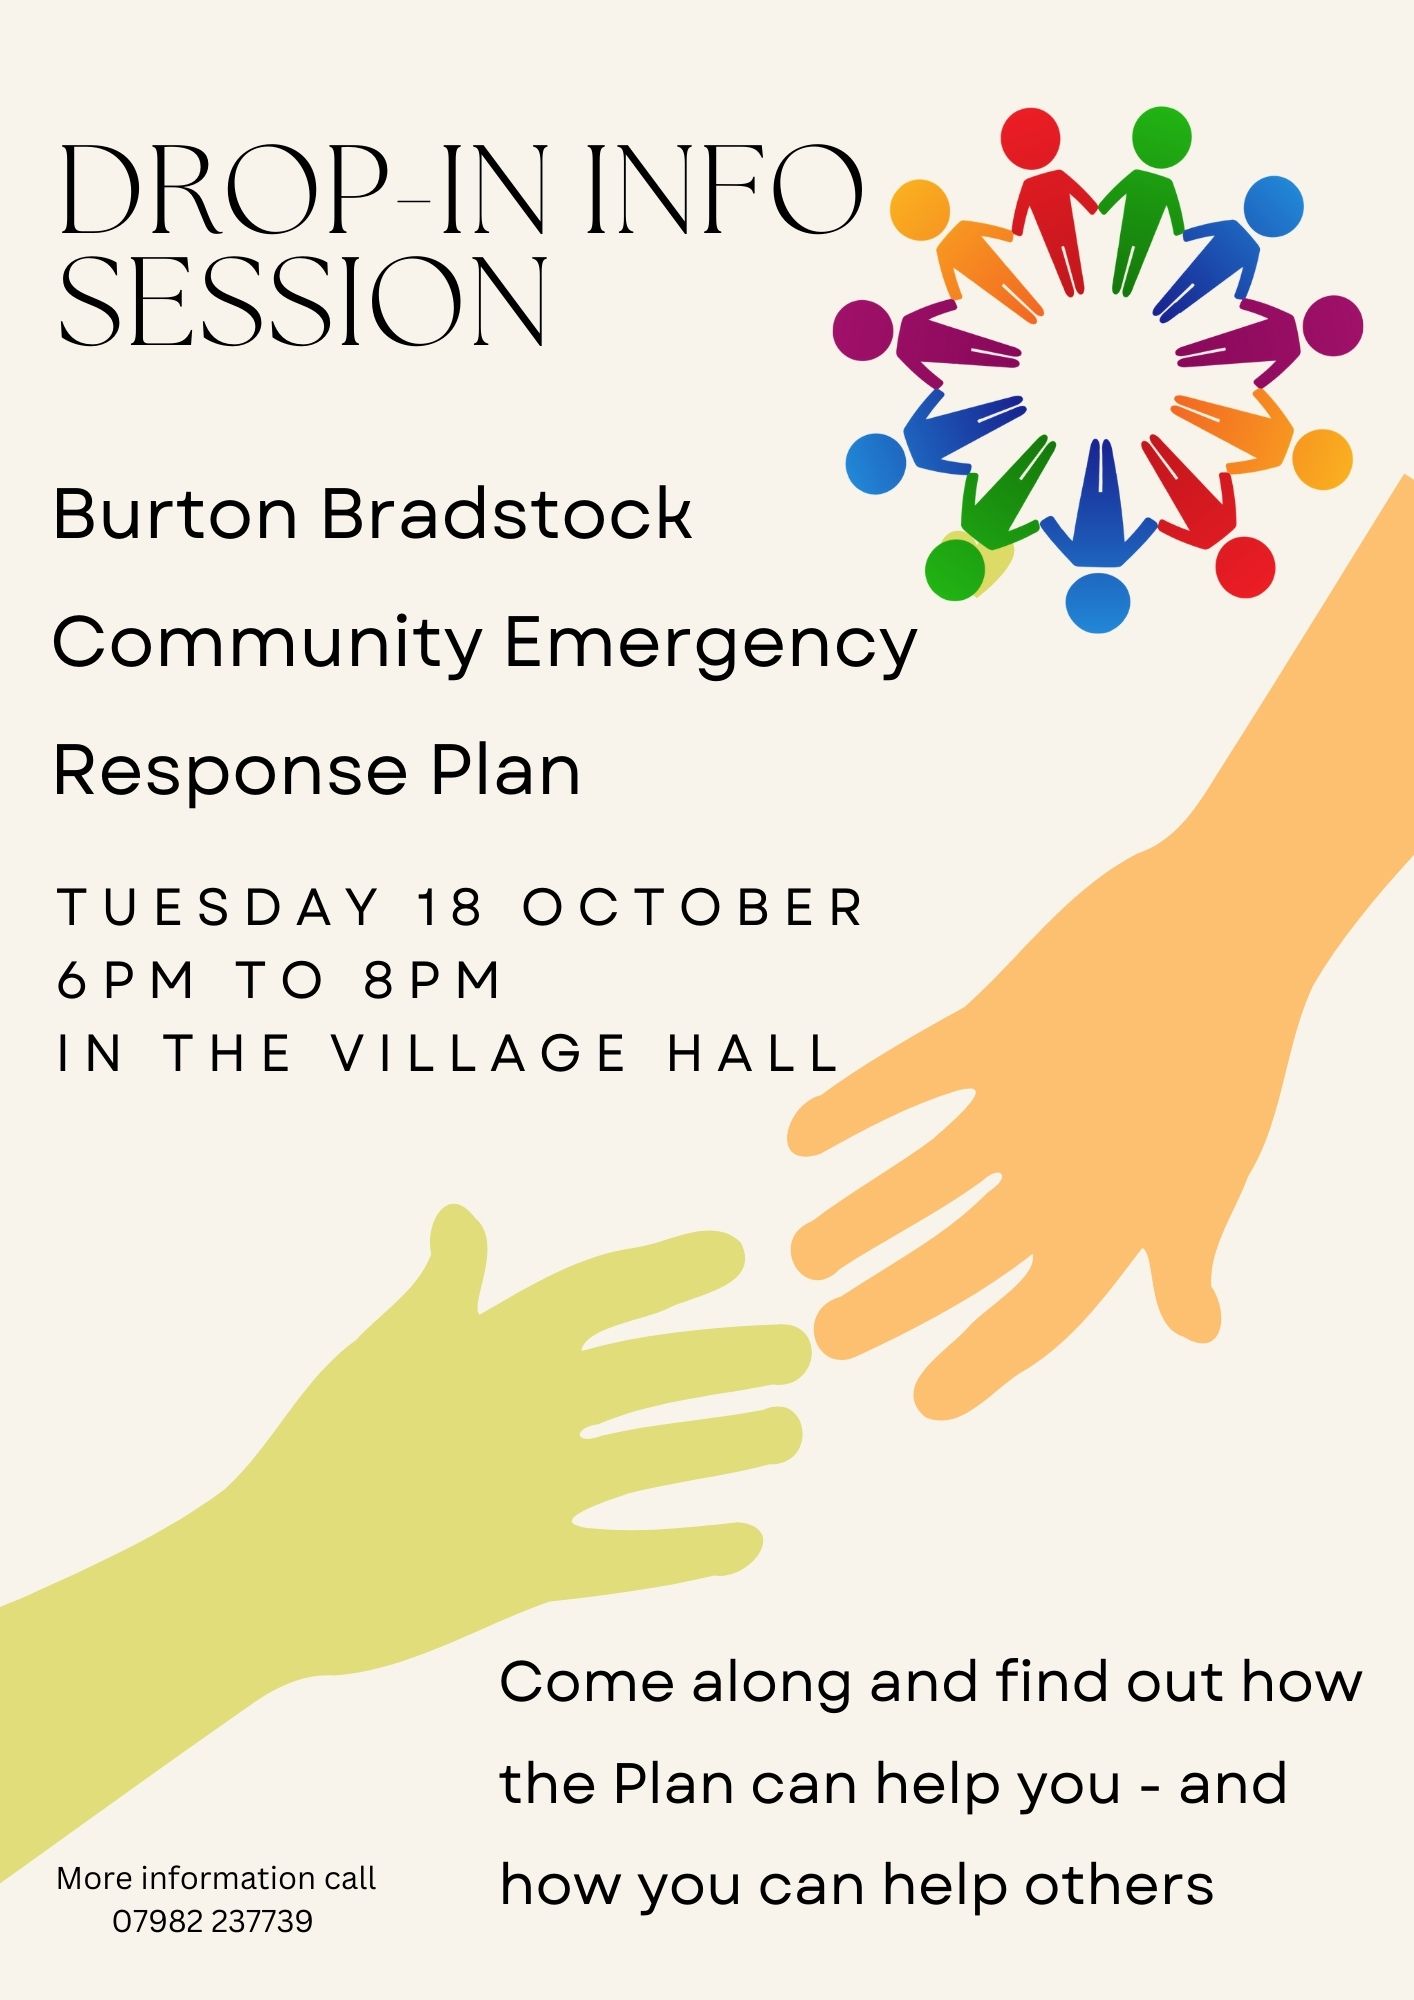 Find Out About Burton Bradstock’s Community Emergency Response Plan